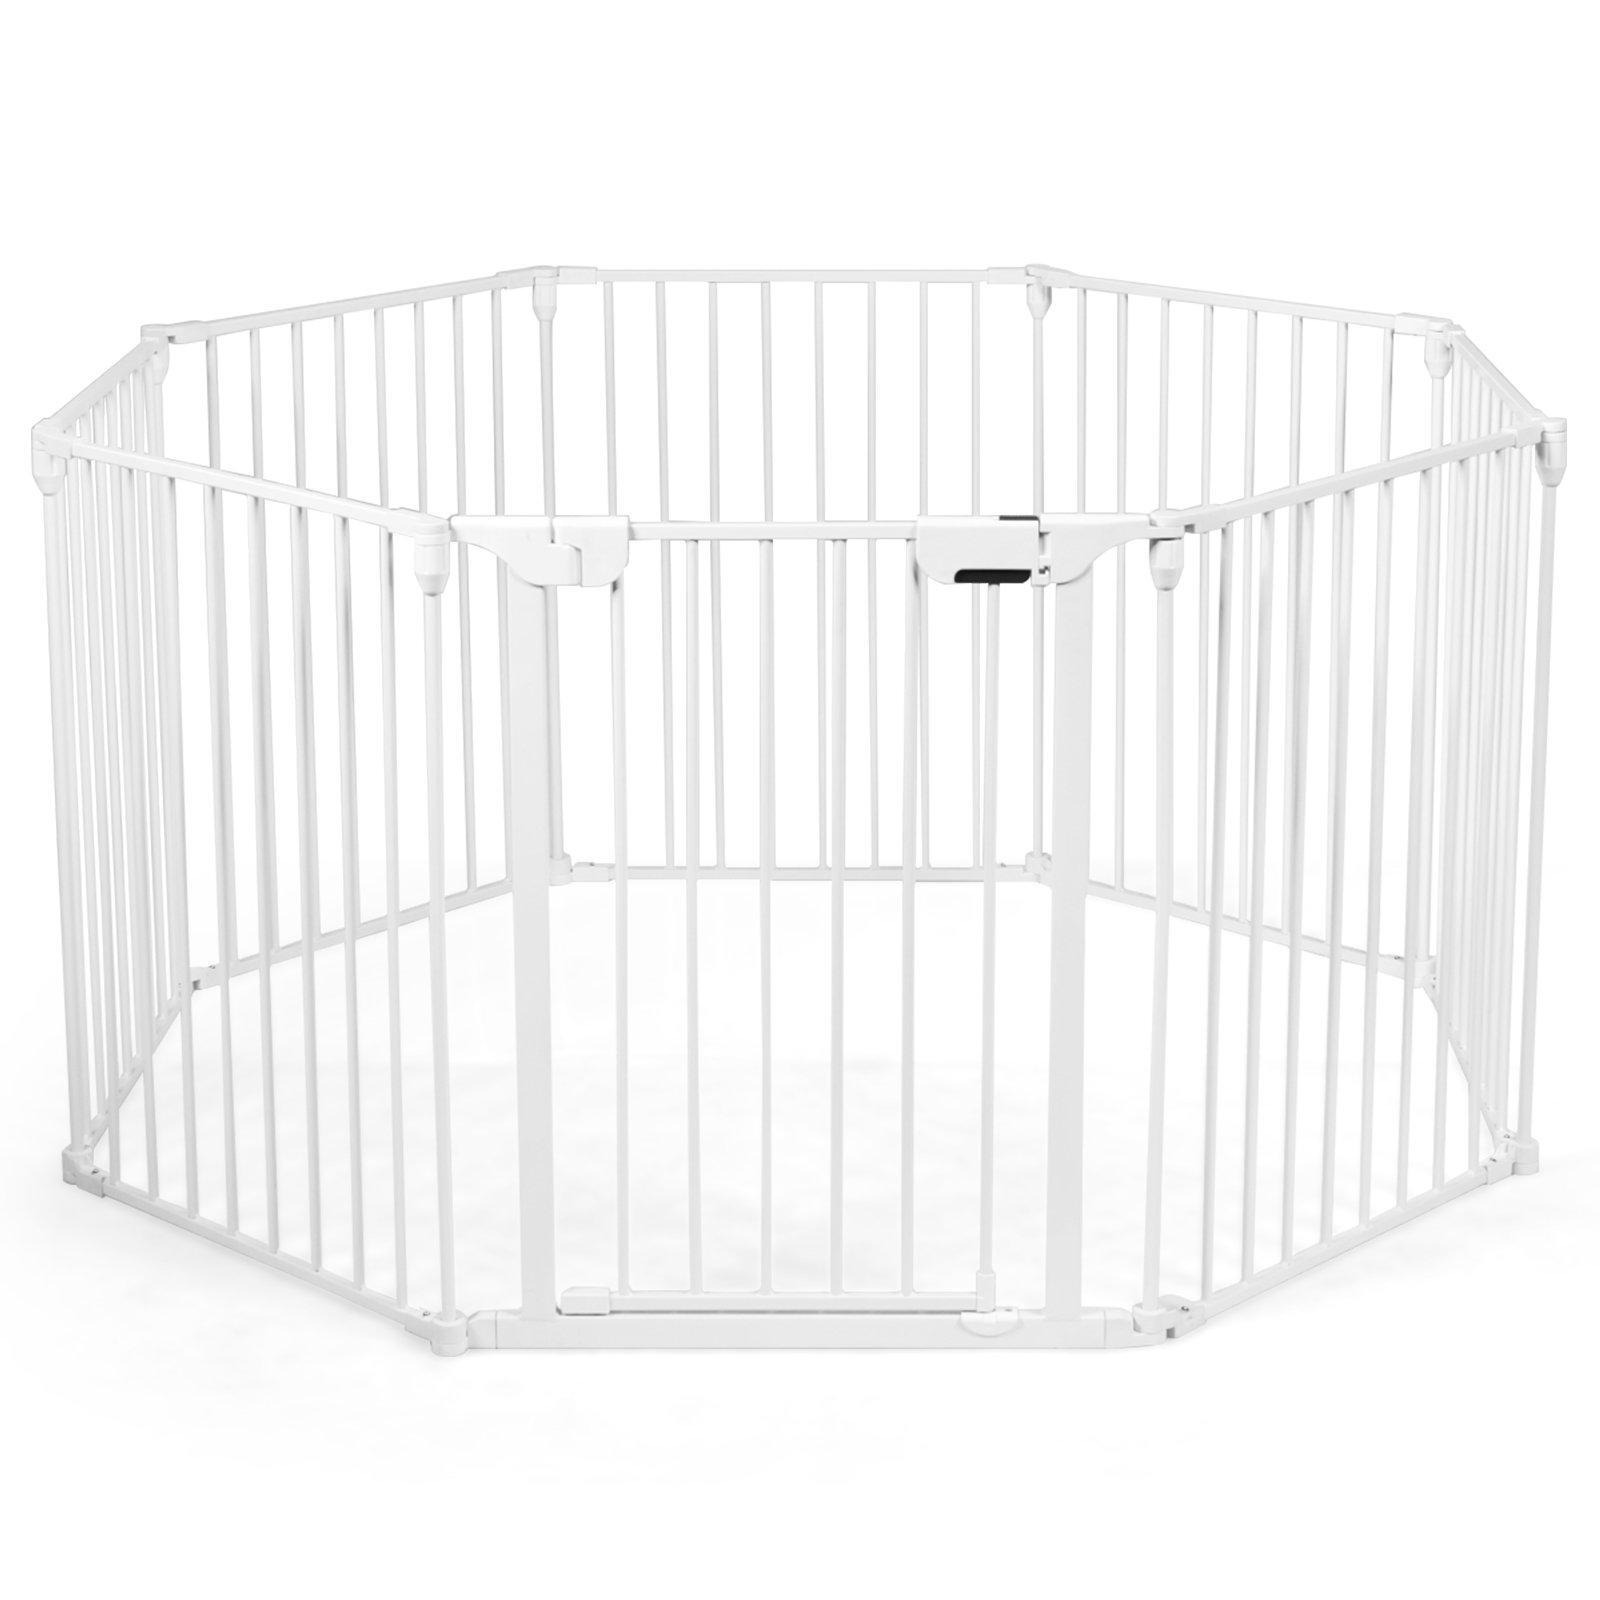 8 Panel Baby Metal PlayPen Pet Fence Playpen Foldable Room Divider 3 IN 1 White - image 1